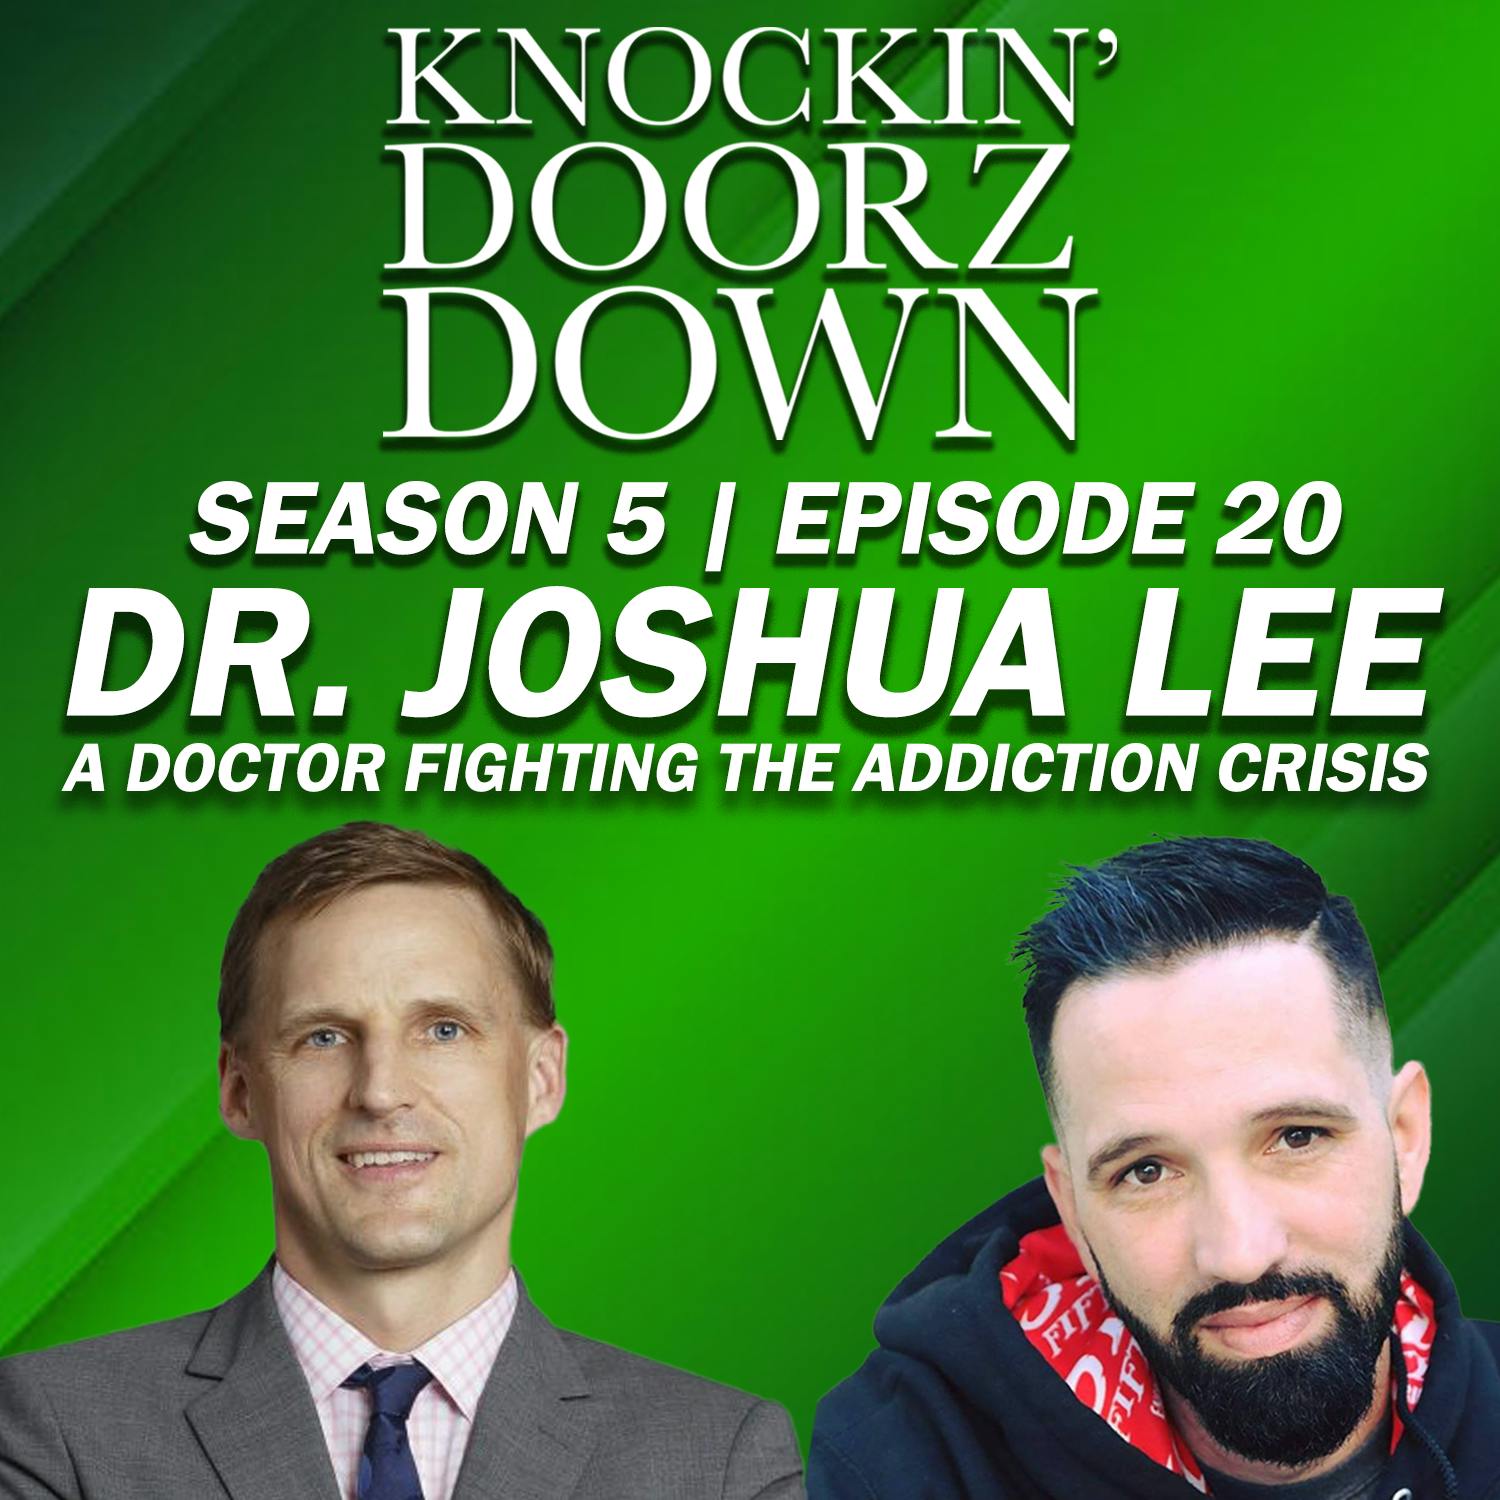 Dr. Joshua Lee | A Medical Practitioner Fighting The Addiction Crisis